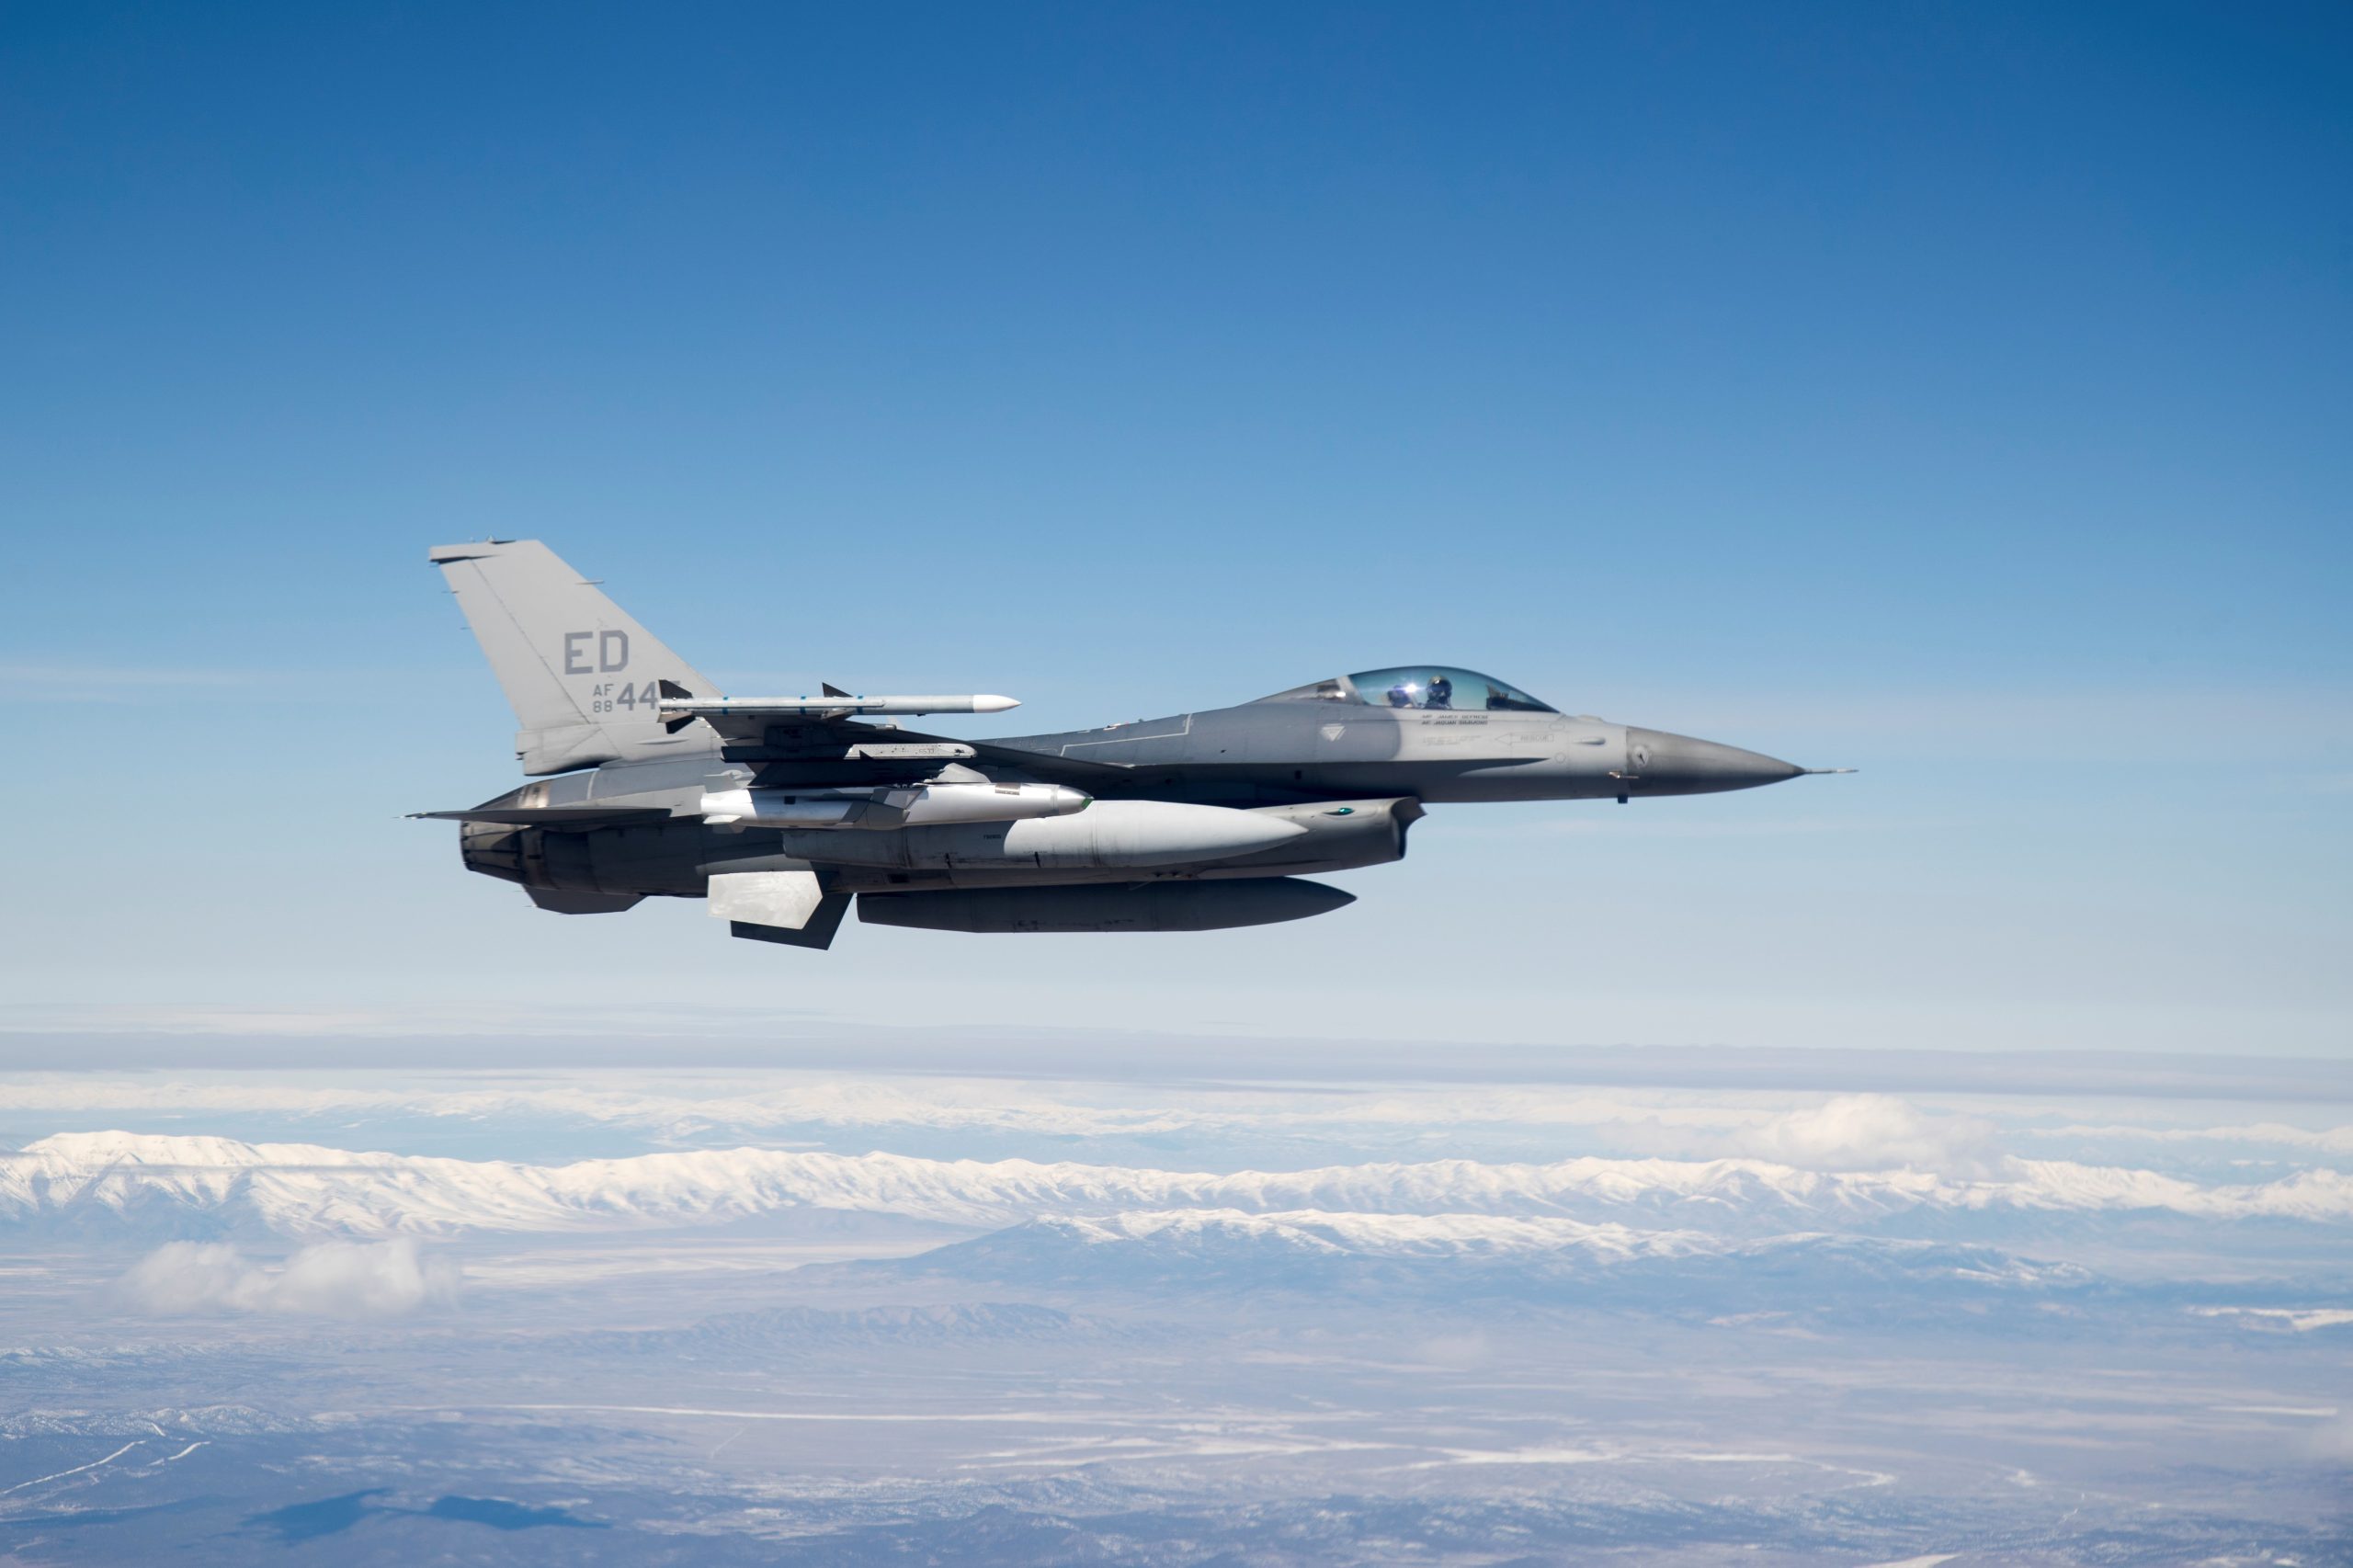 Three F-16s Arrive at Eglin, Ready to Be Modified to Test Autonomous Tech